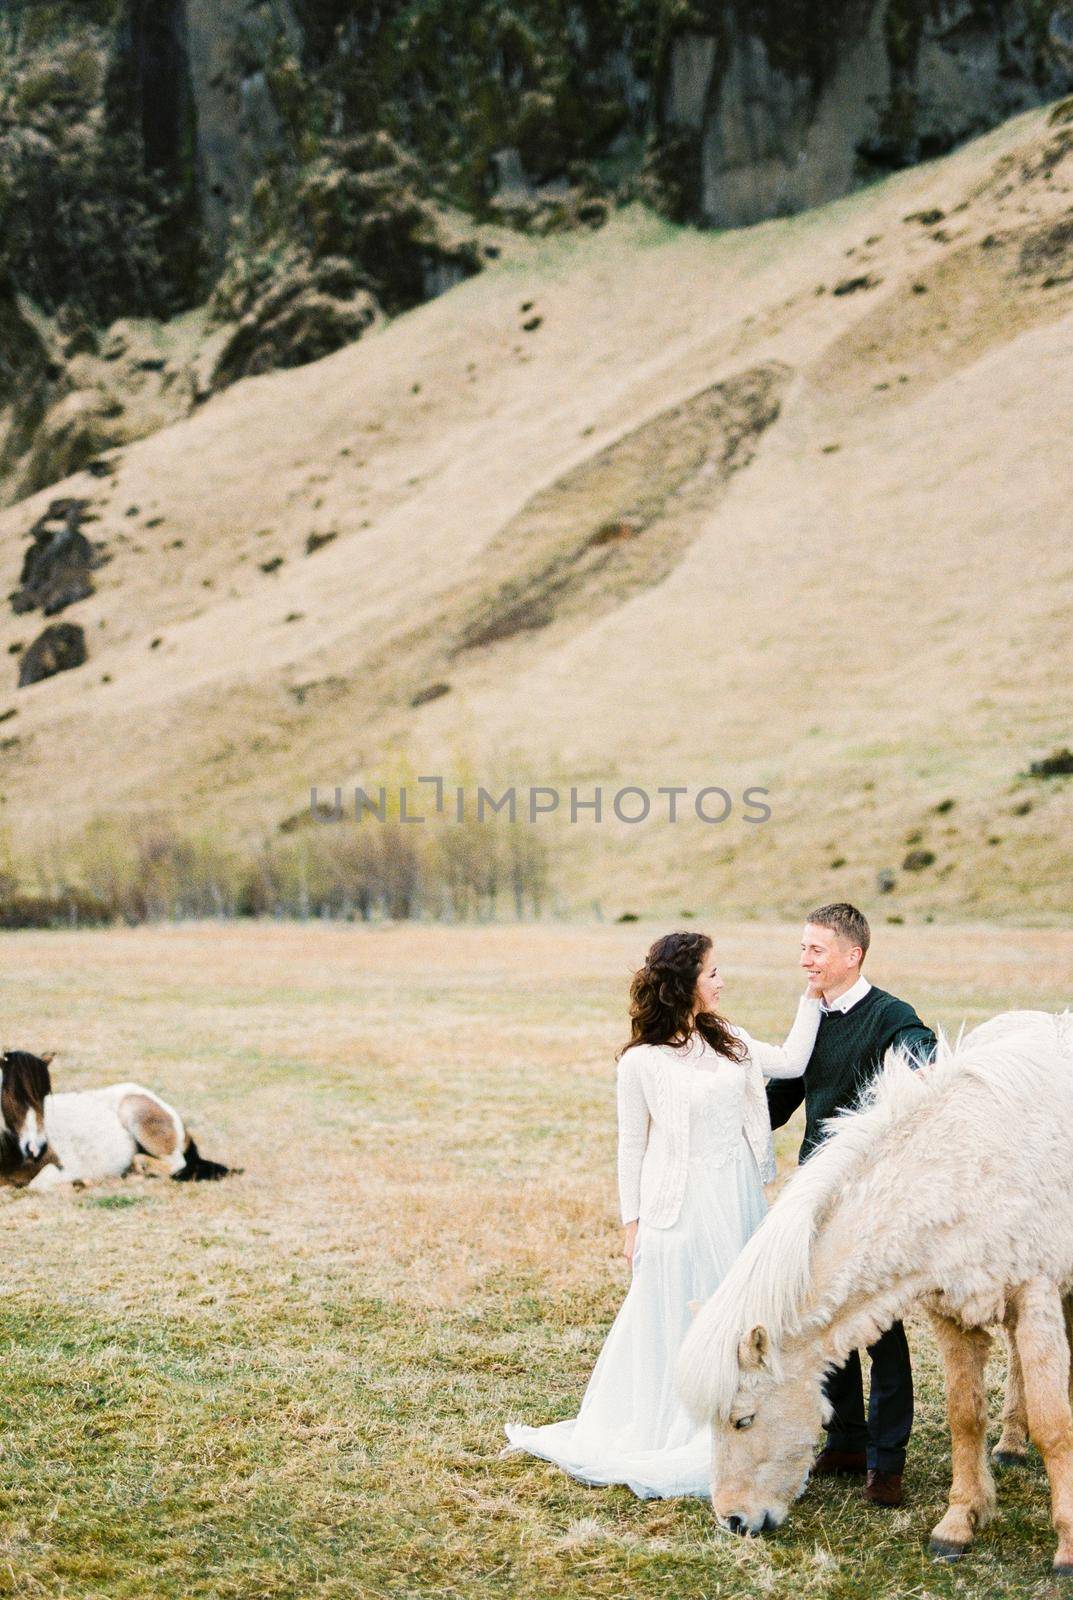 Groom and bride in a pasture among grazing horses. High quality photo